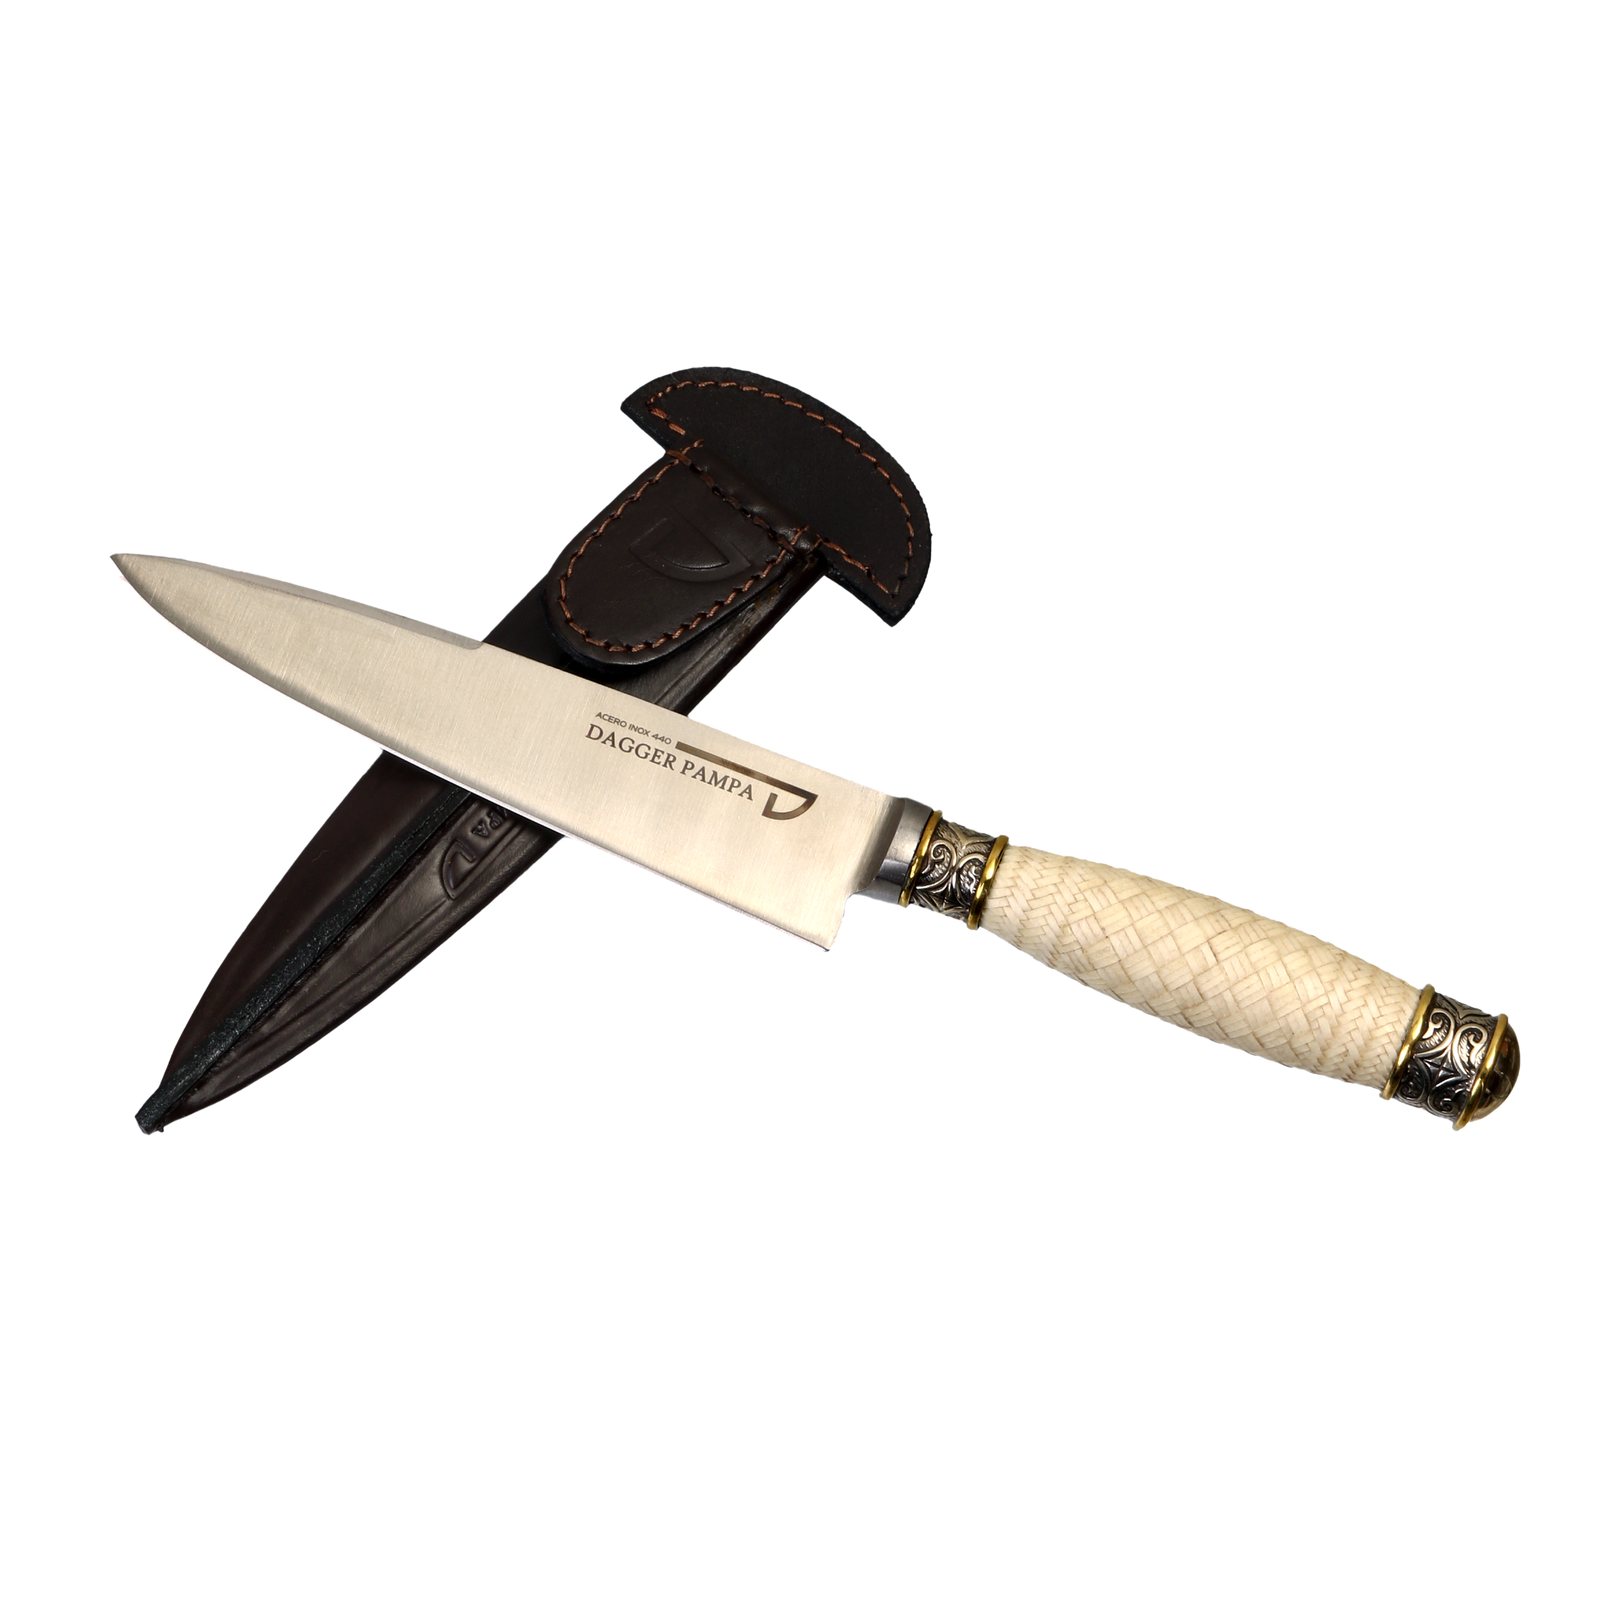 Stainless Steel 440 Knife Blade with Thin Braided Leather and Nickel Silver Ferrules with Bronze Details